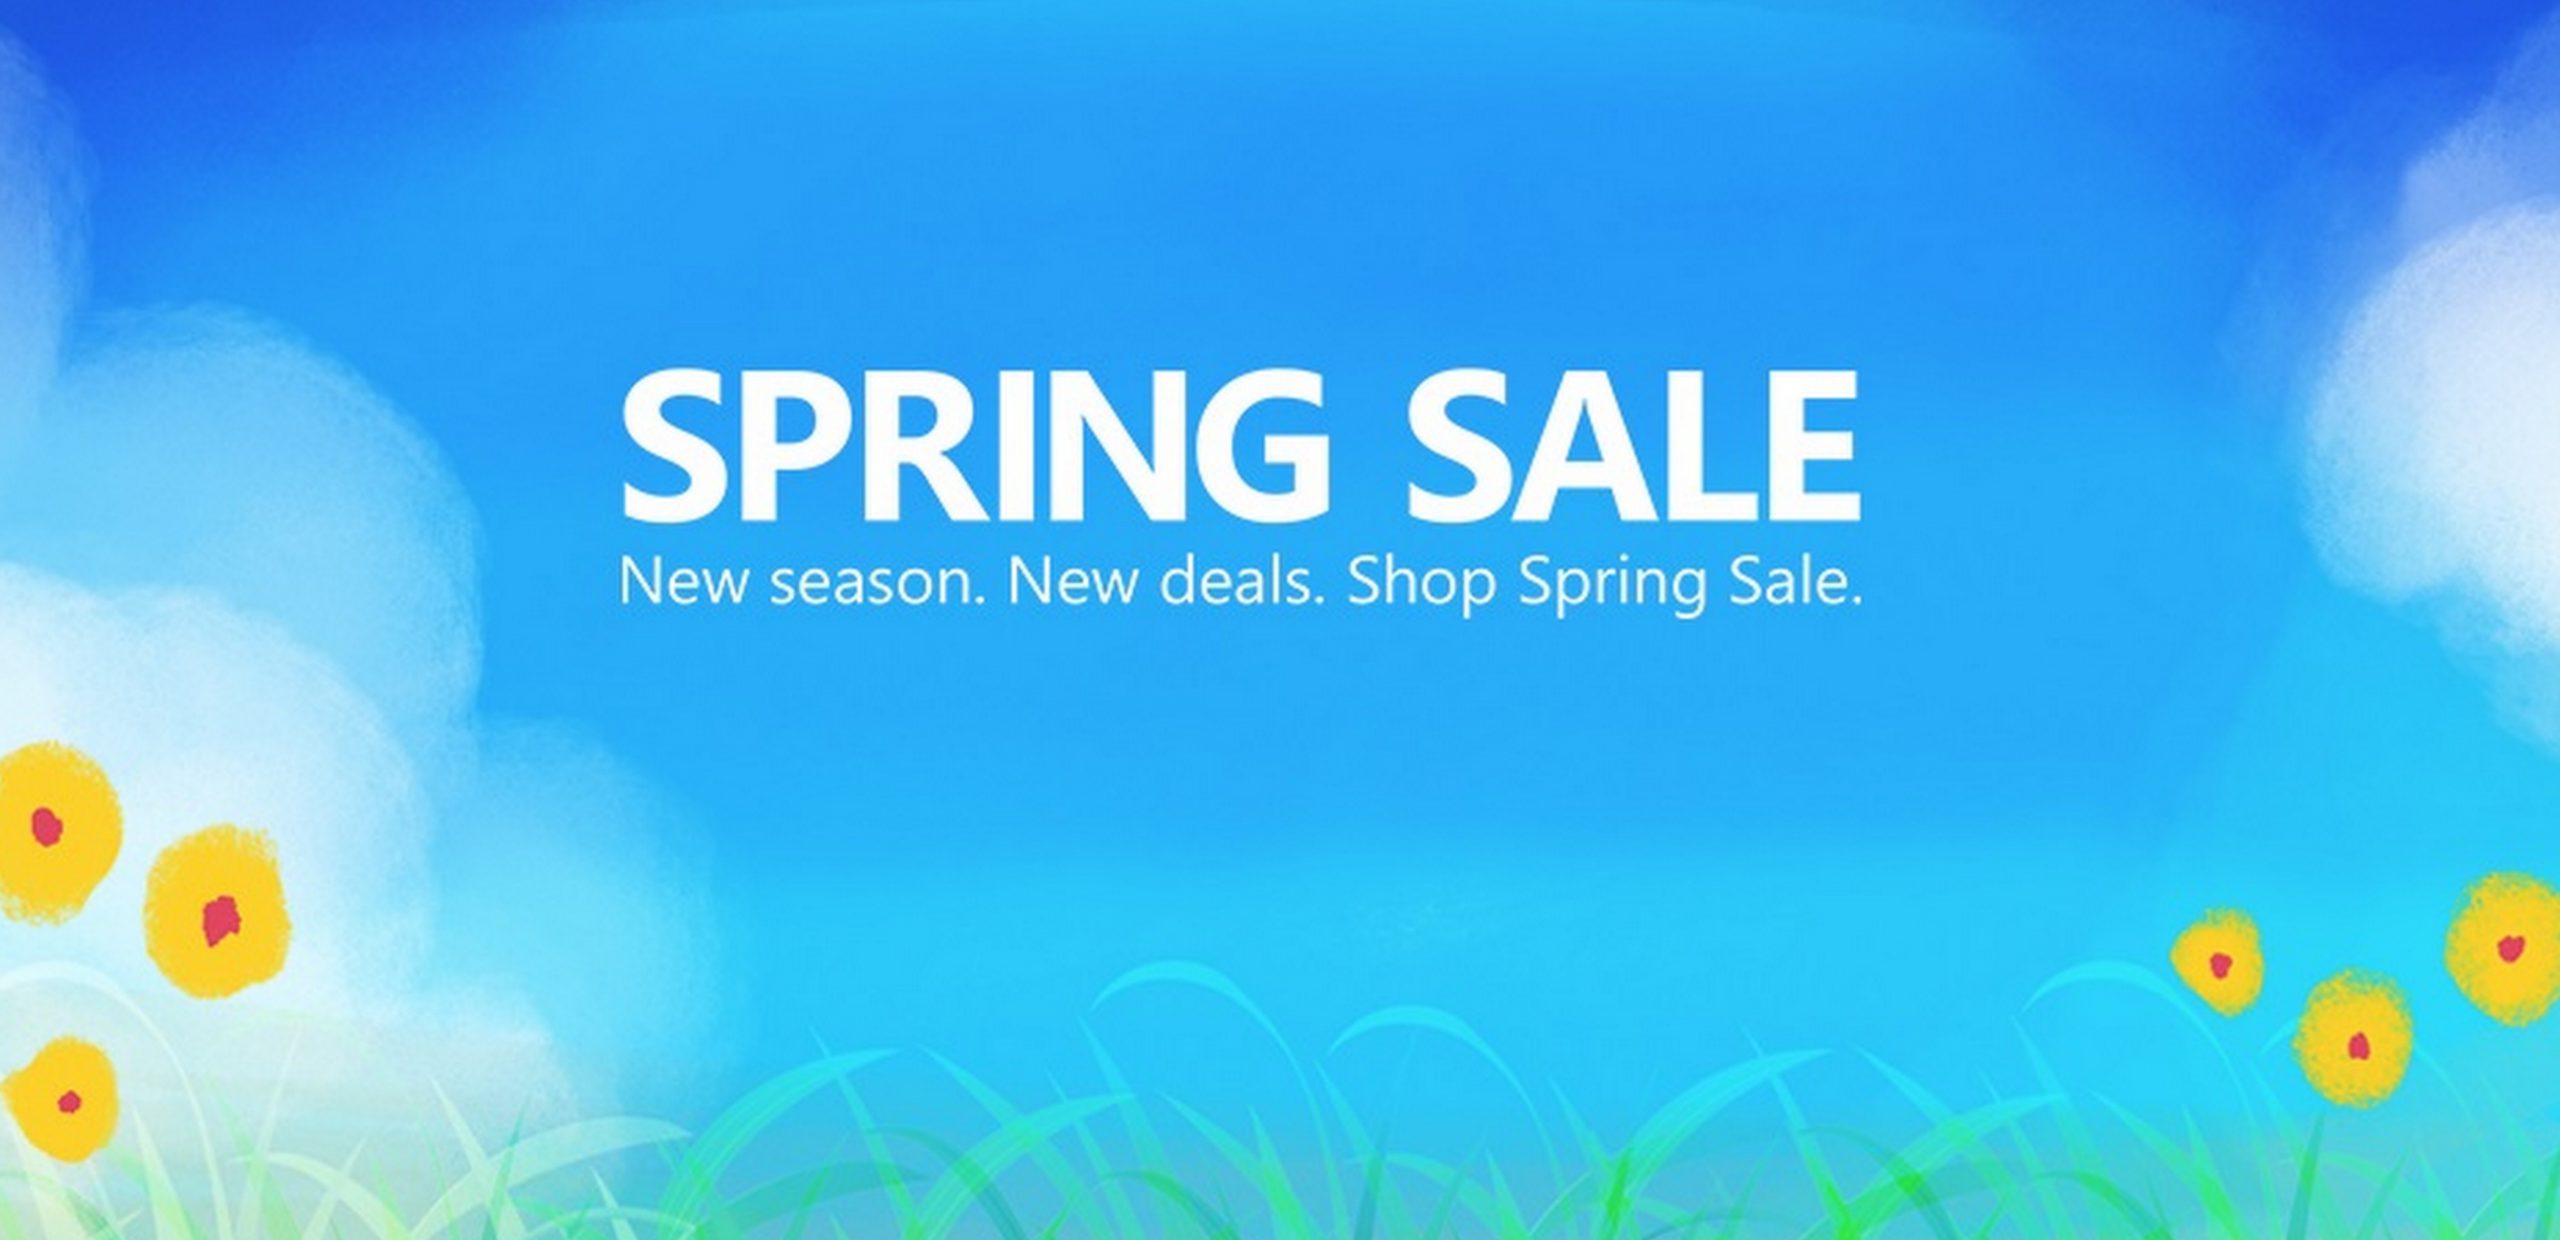 Spring Sale SAVE UP TO 50%